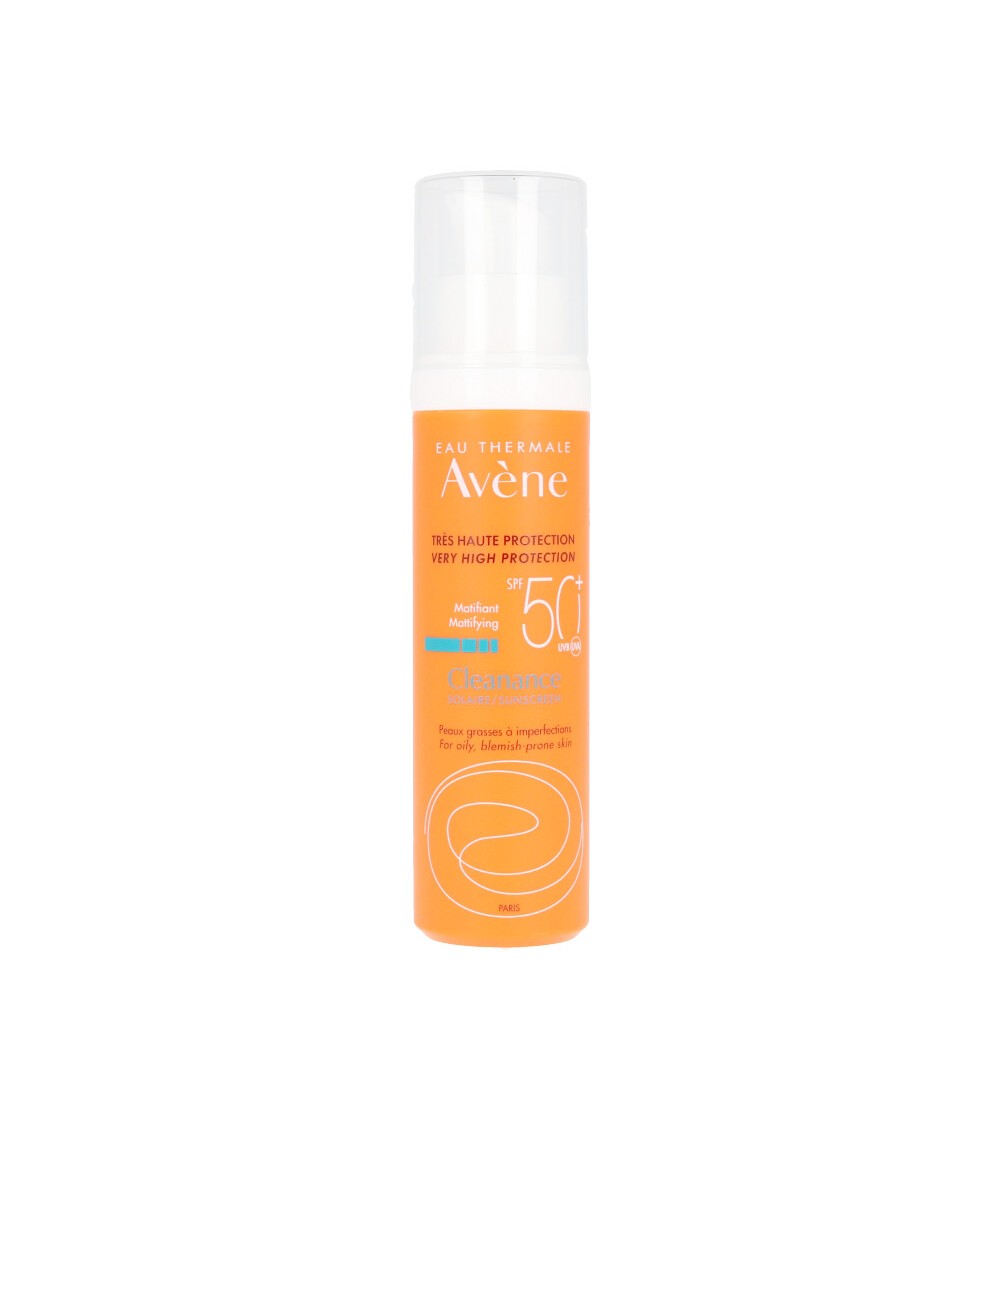 SOLAIRE HAUTE PROTECTION cleanance SPF50+ 50 ml